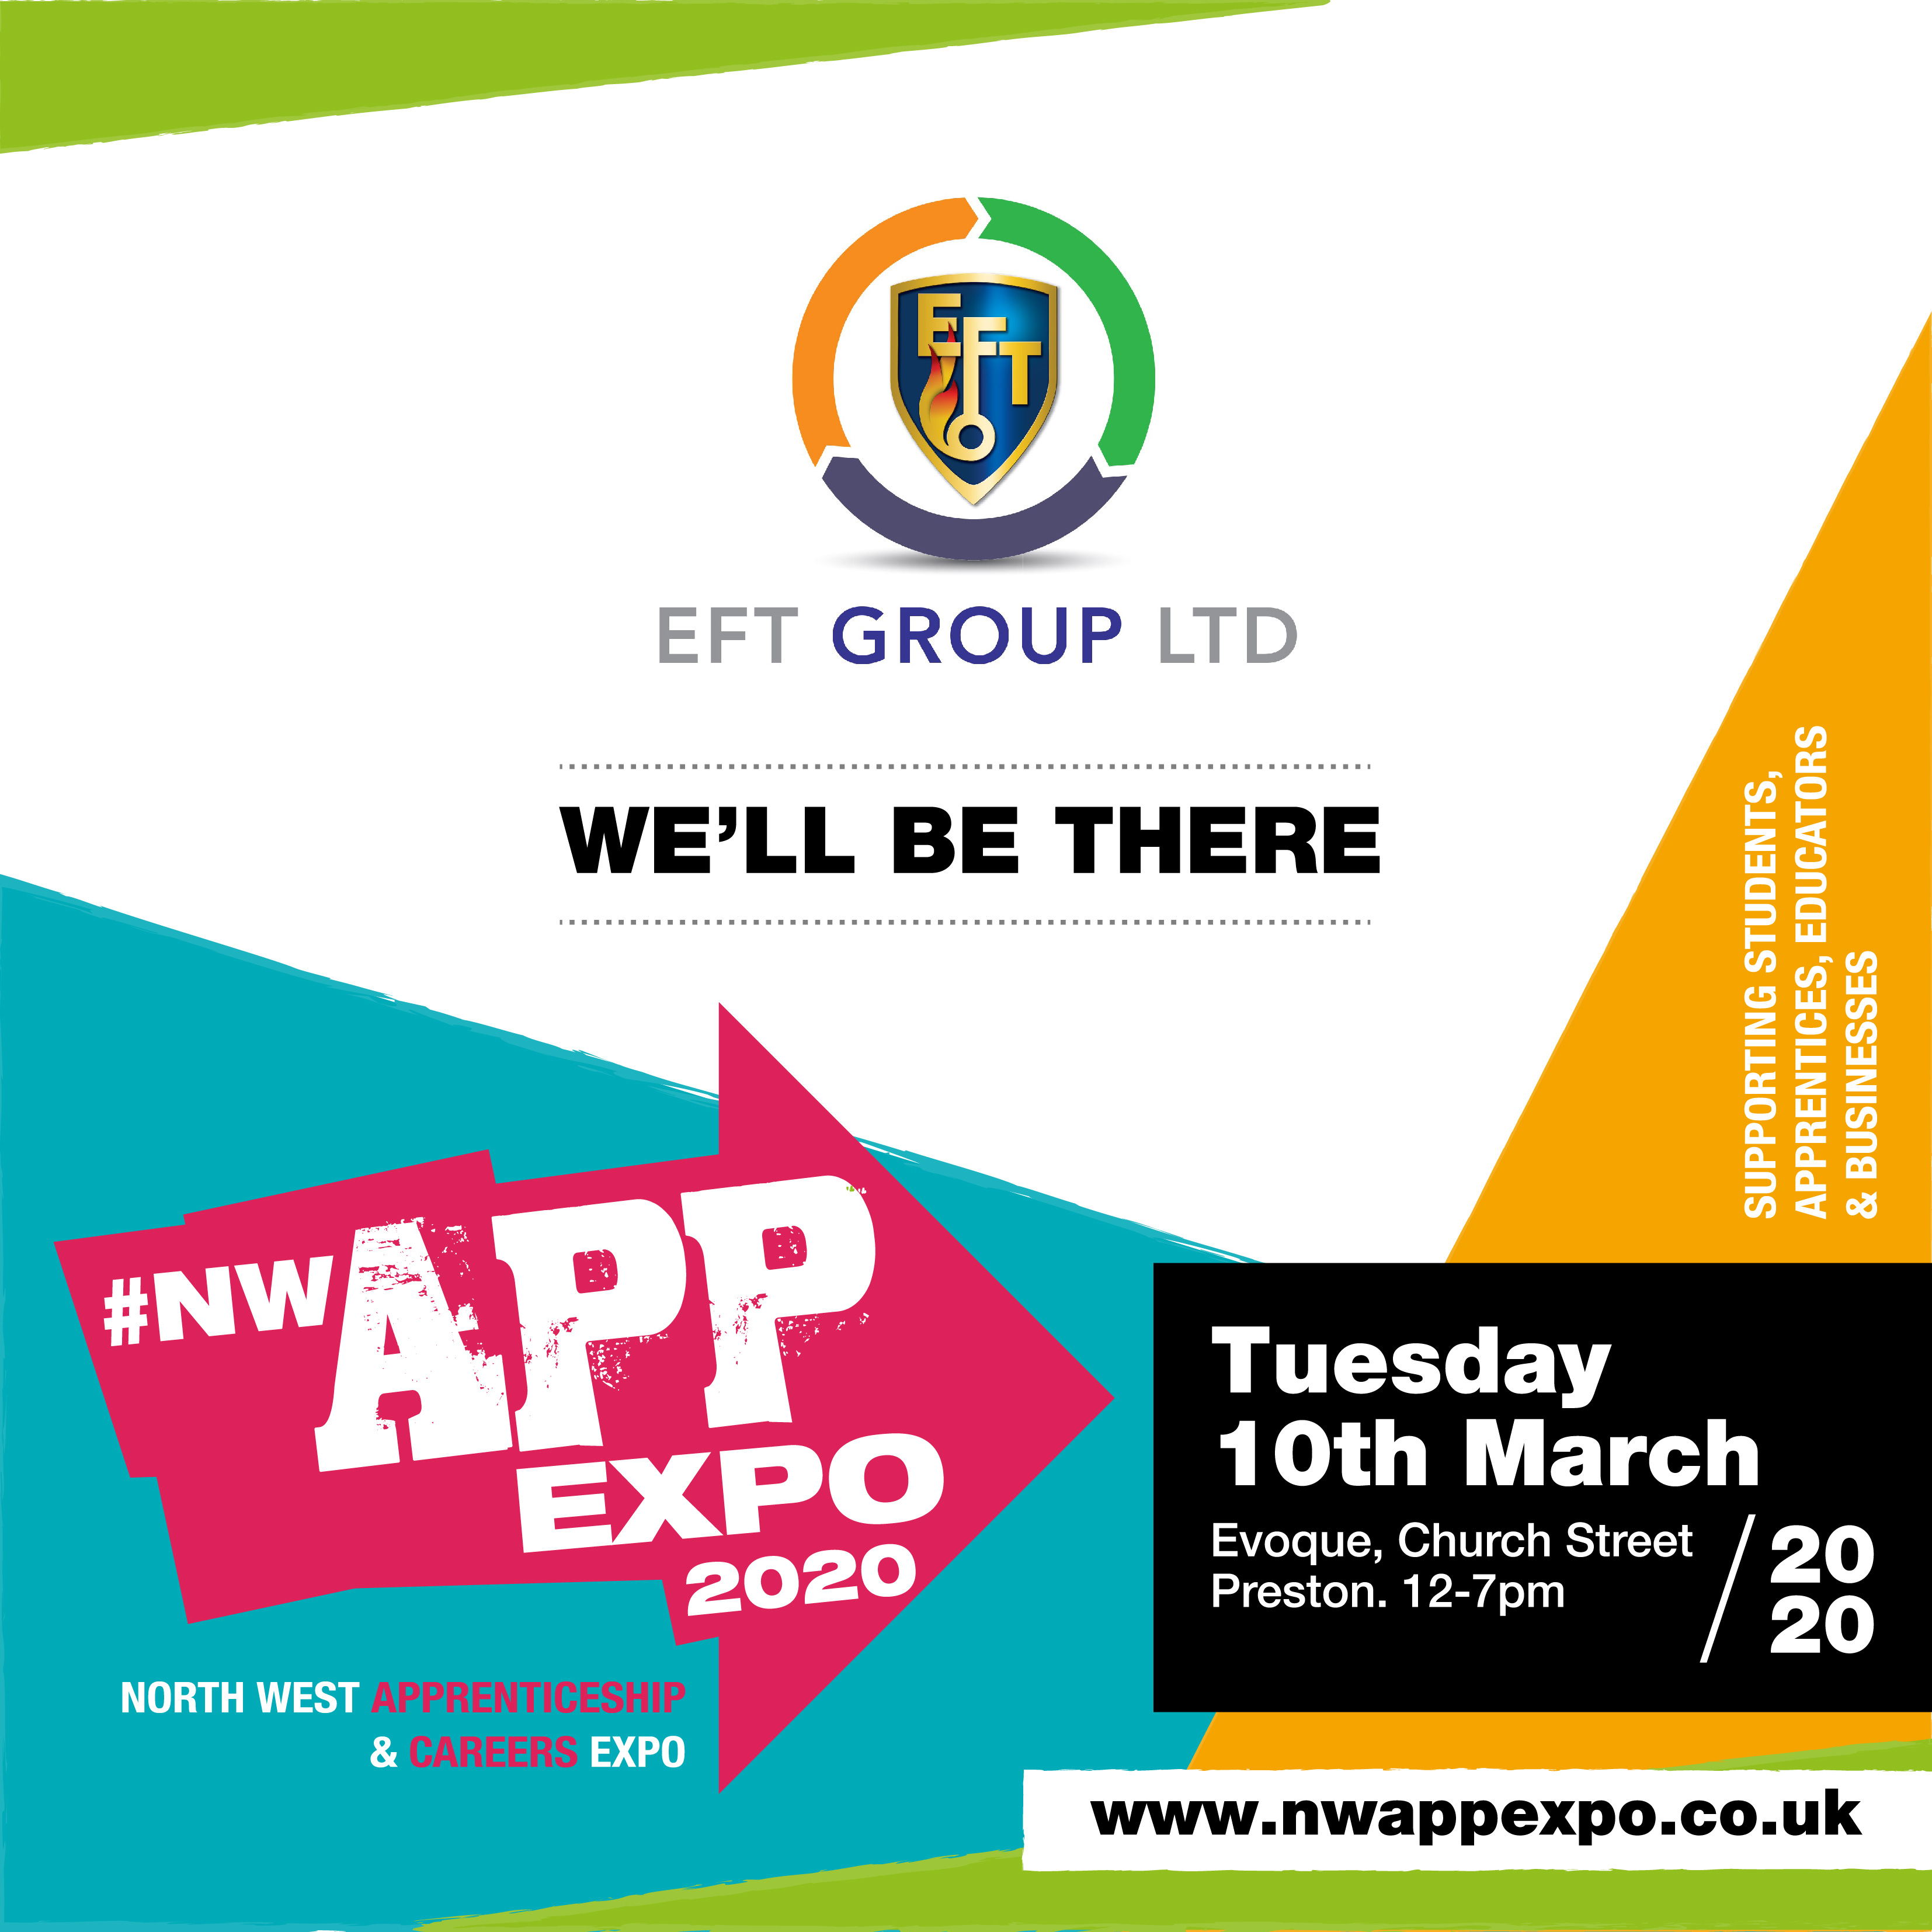 Catch EFT At North West 2020 Apprentice Expo – Tuesday 10th March ...